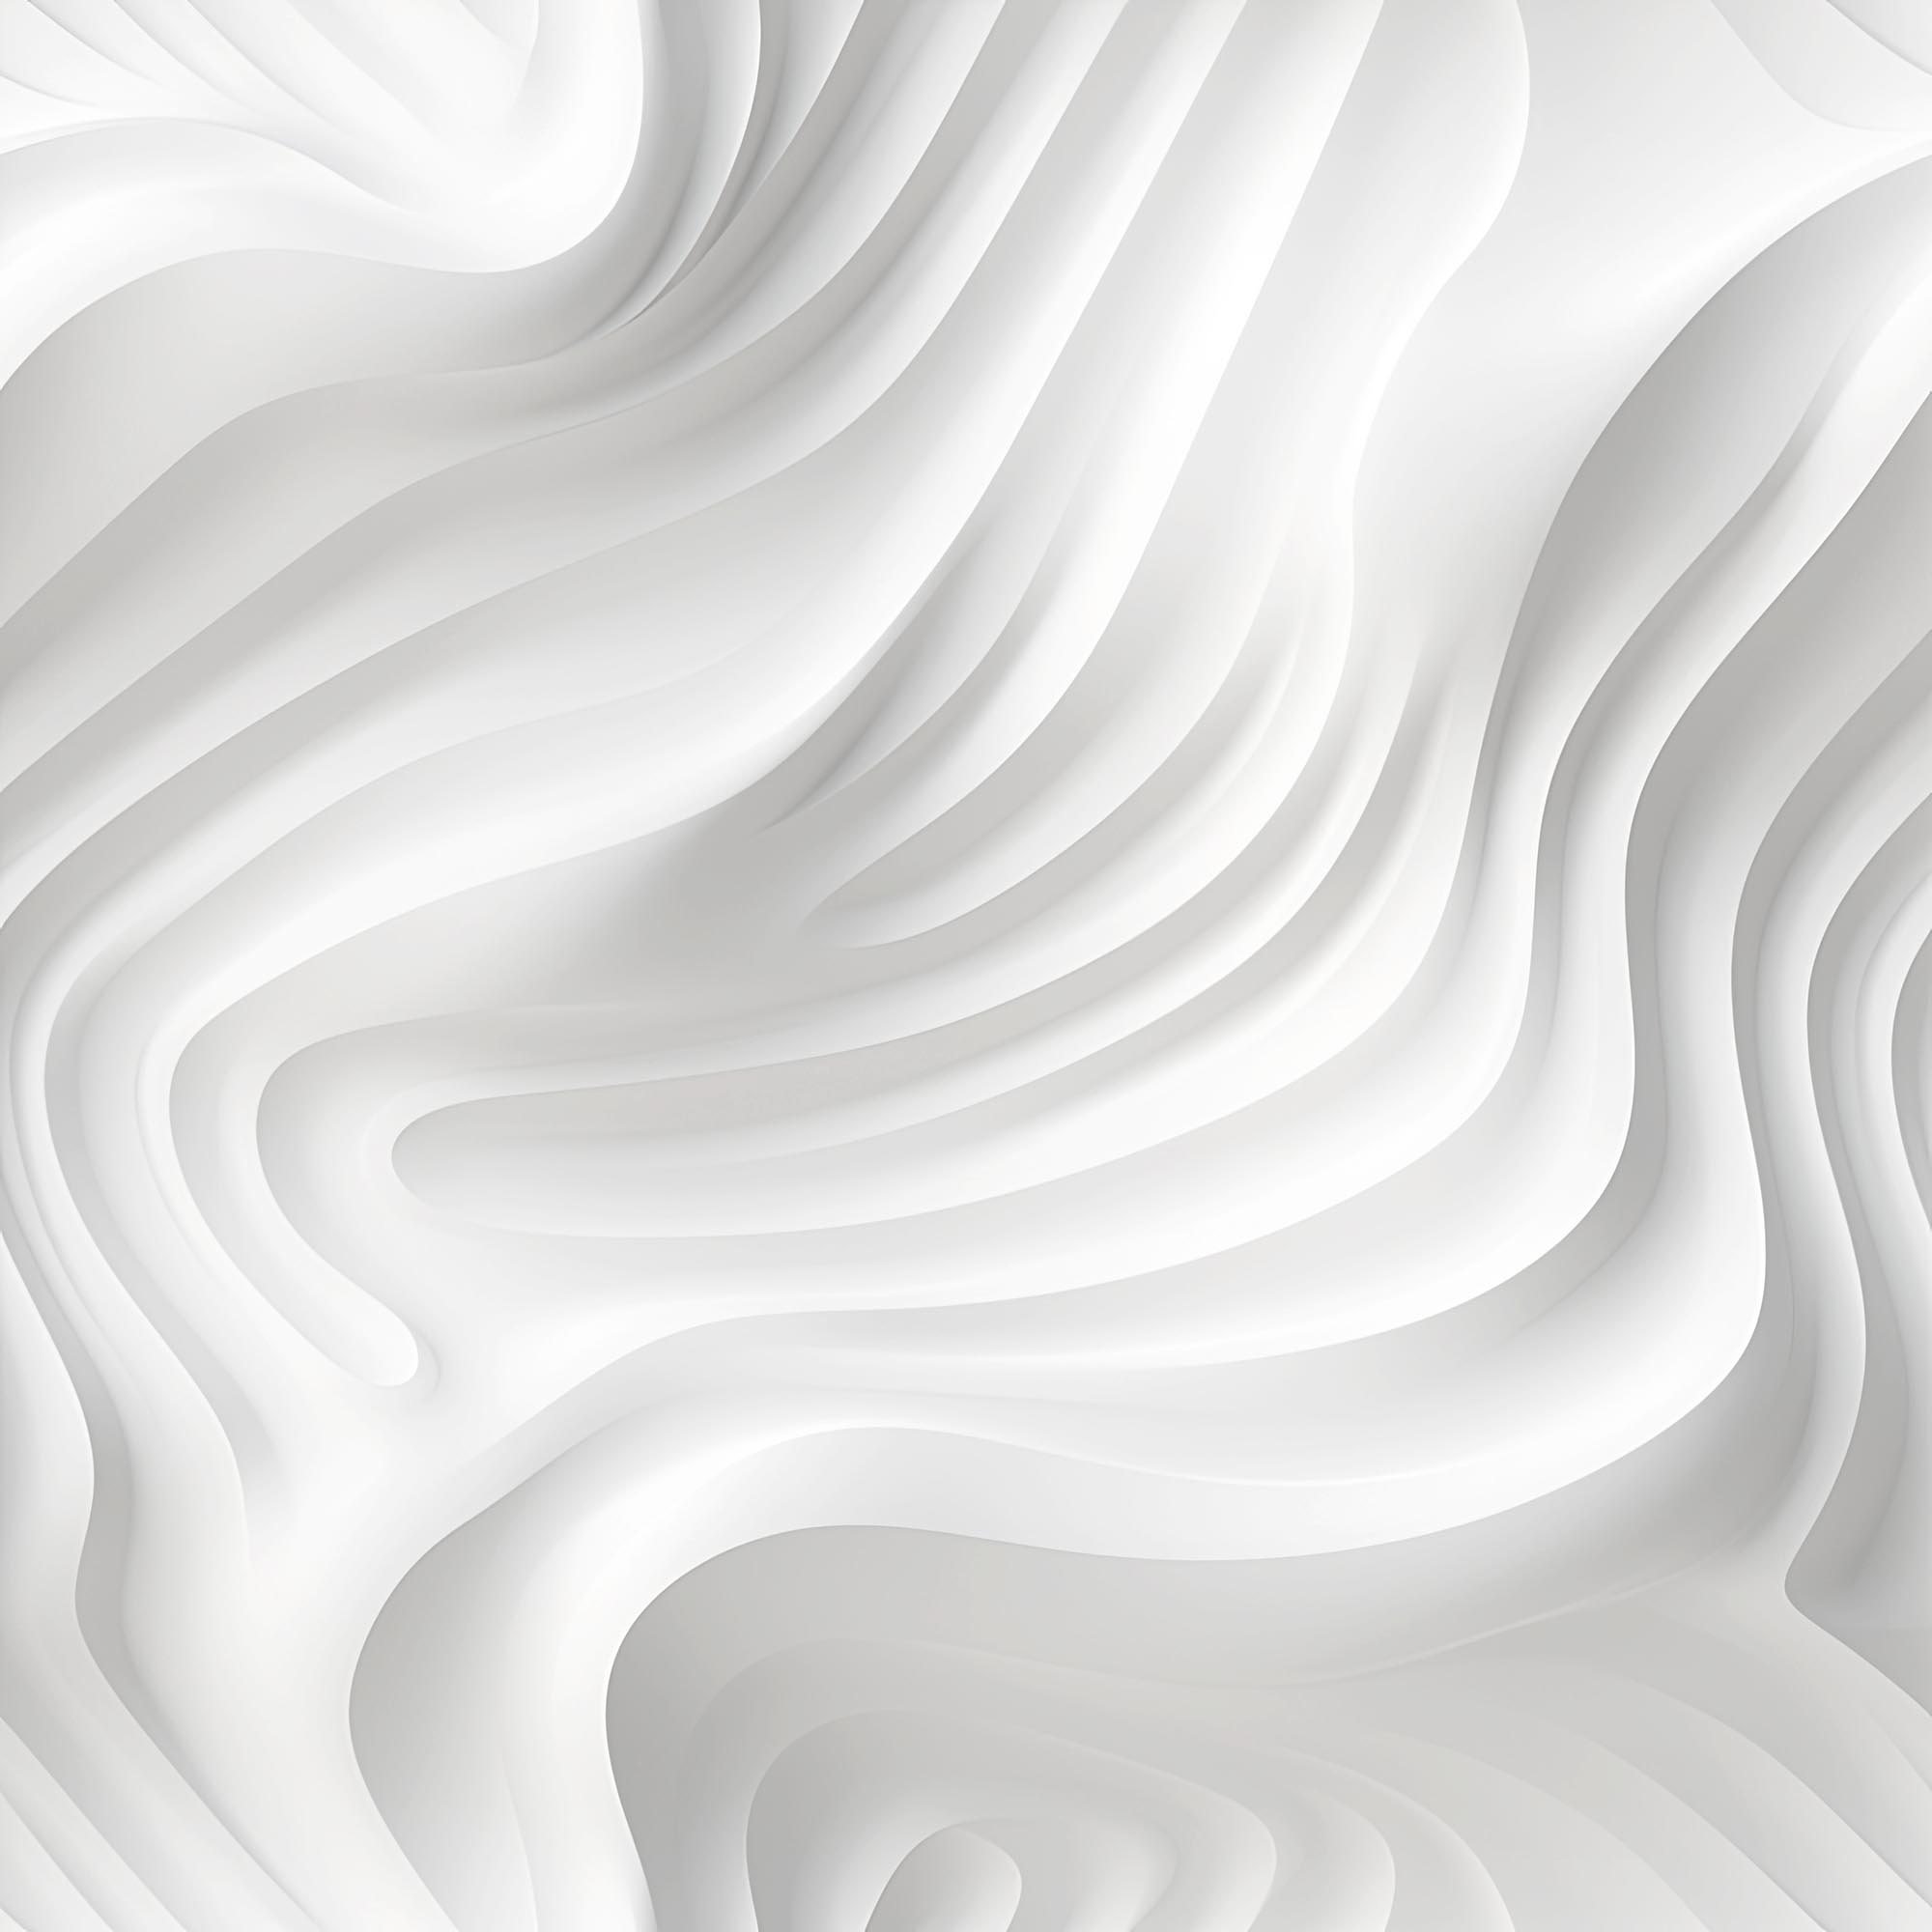 Abstract 3d white background, organic shapes seamless pattern texture